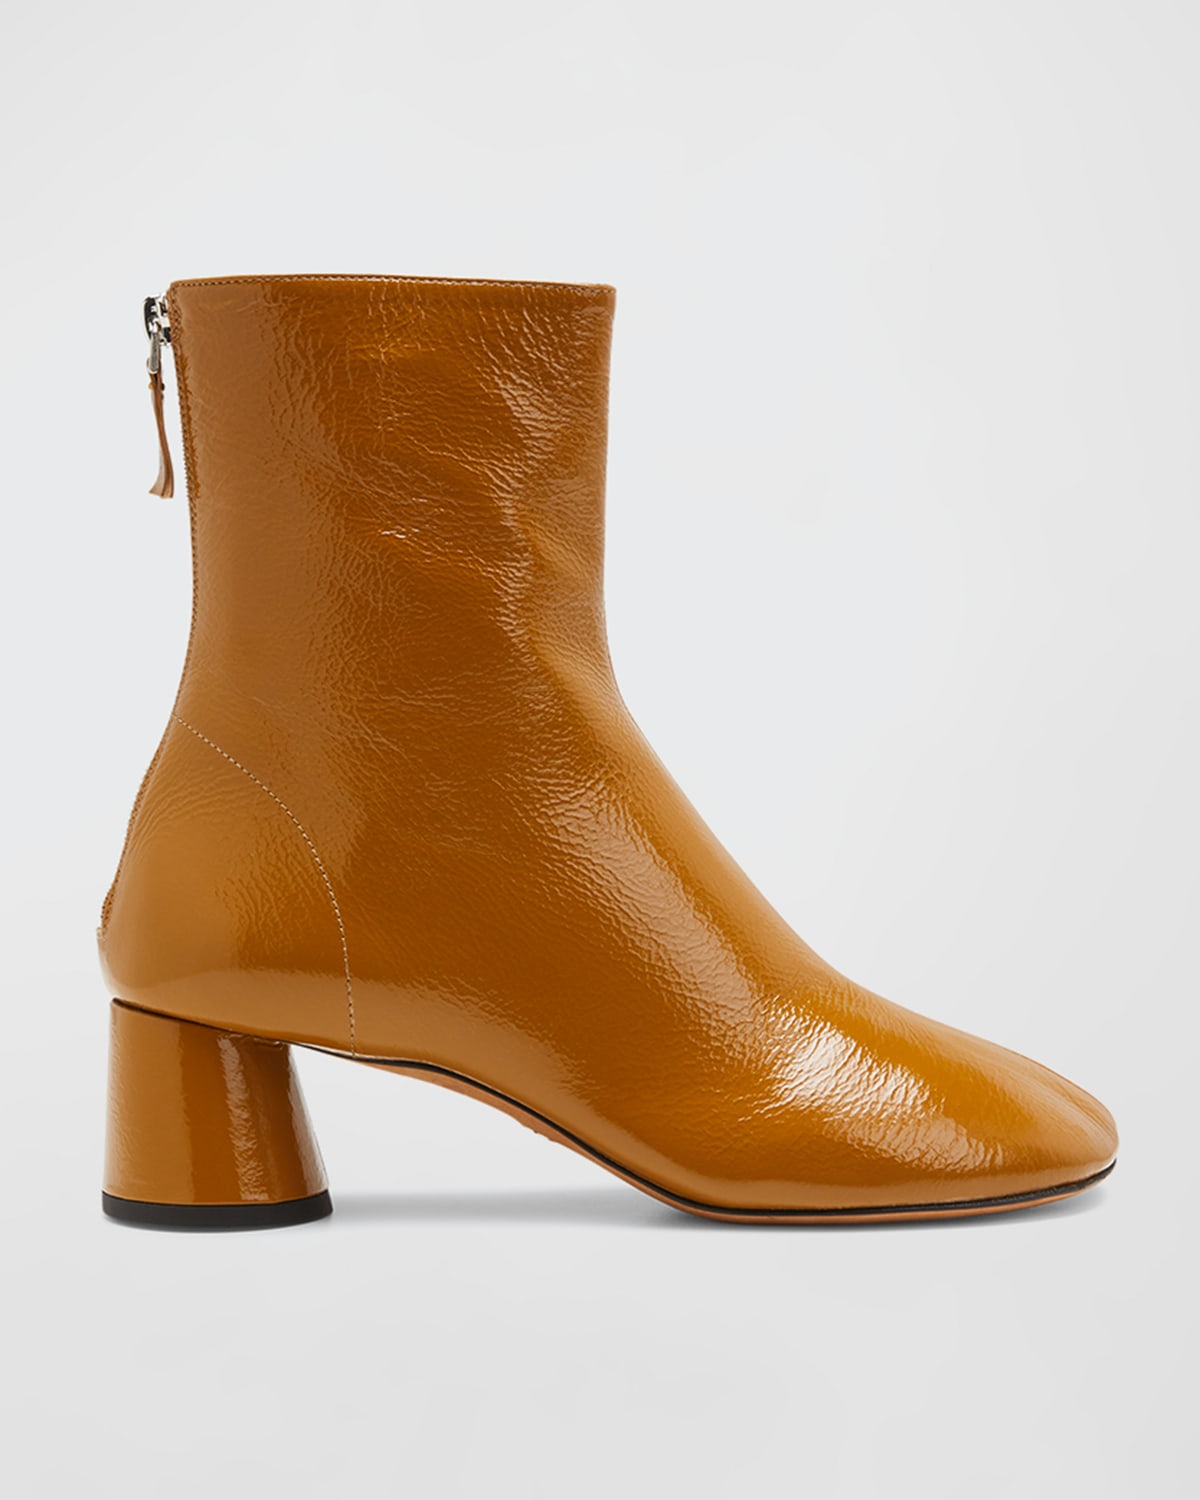 Glove Patent Leather Ankle Boots